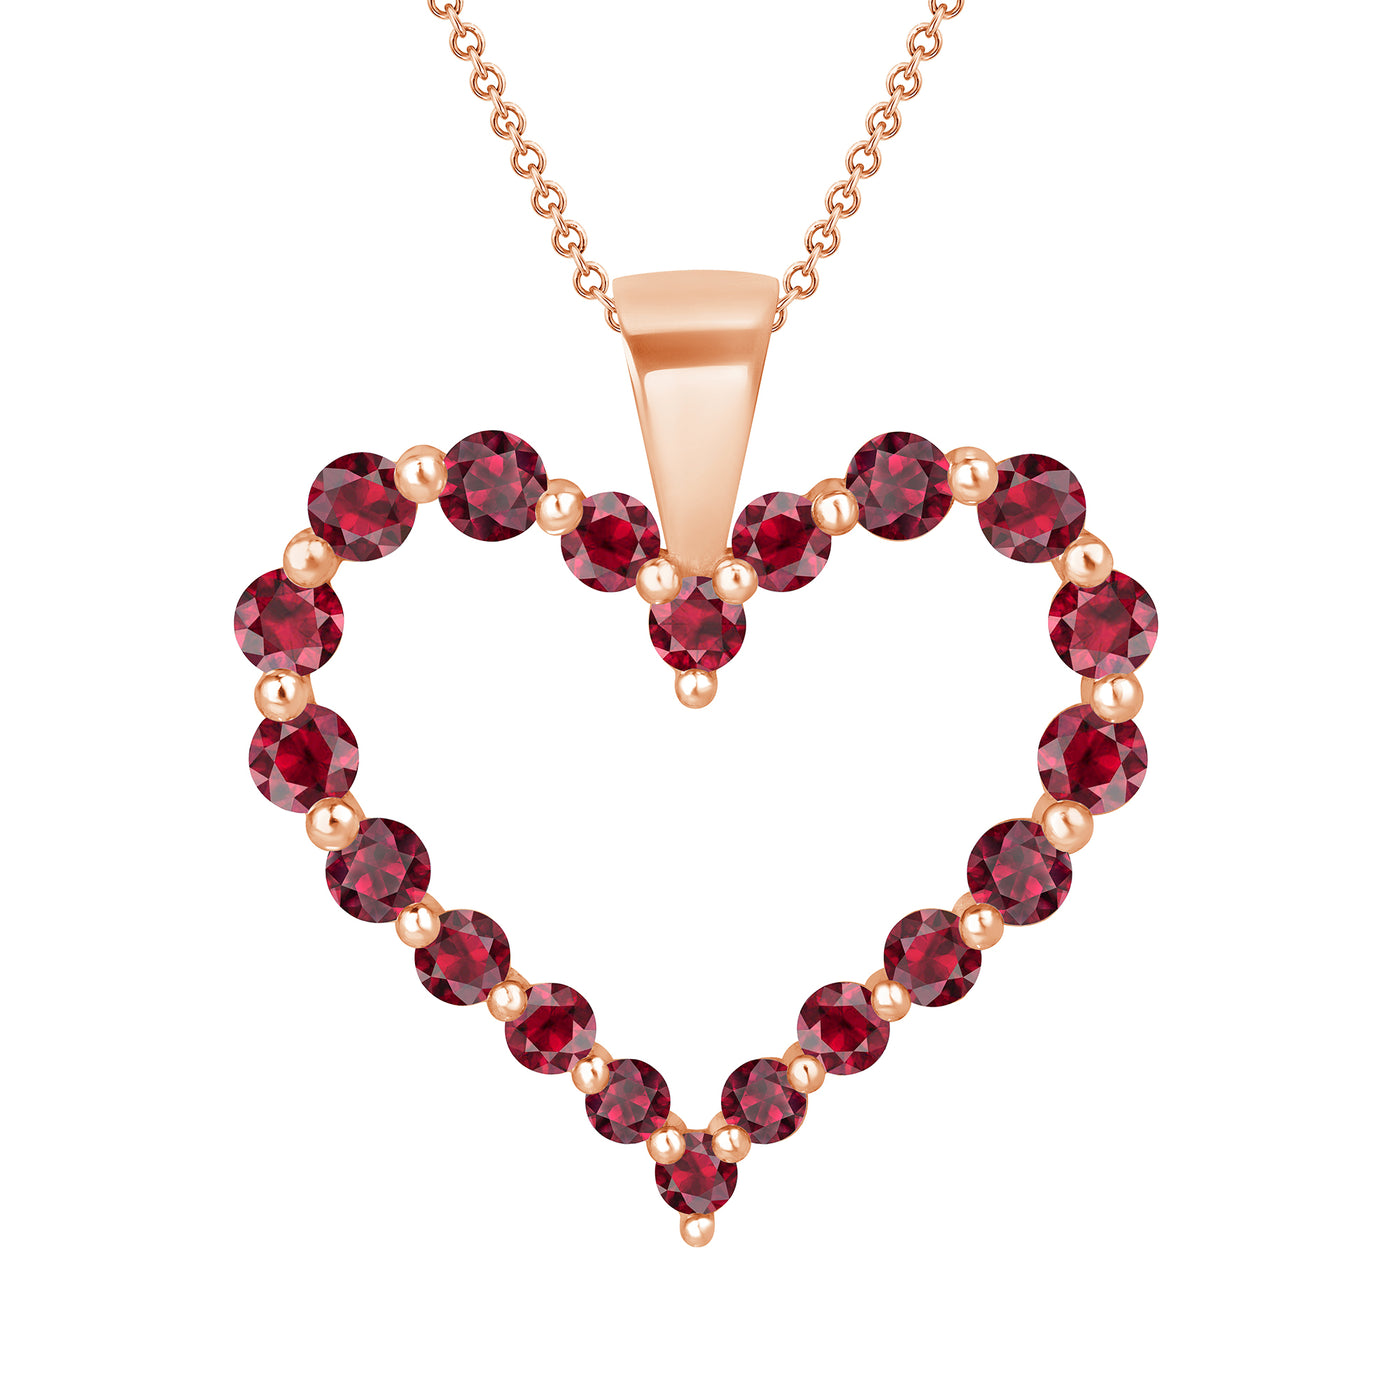 Ruby Shared Prong 0.80 Carat Heart Pendant in Yellow, Rose and White Gold 16" Chain